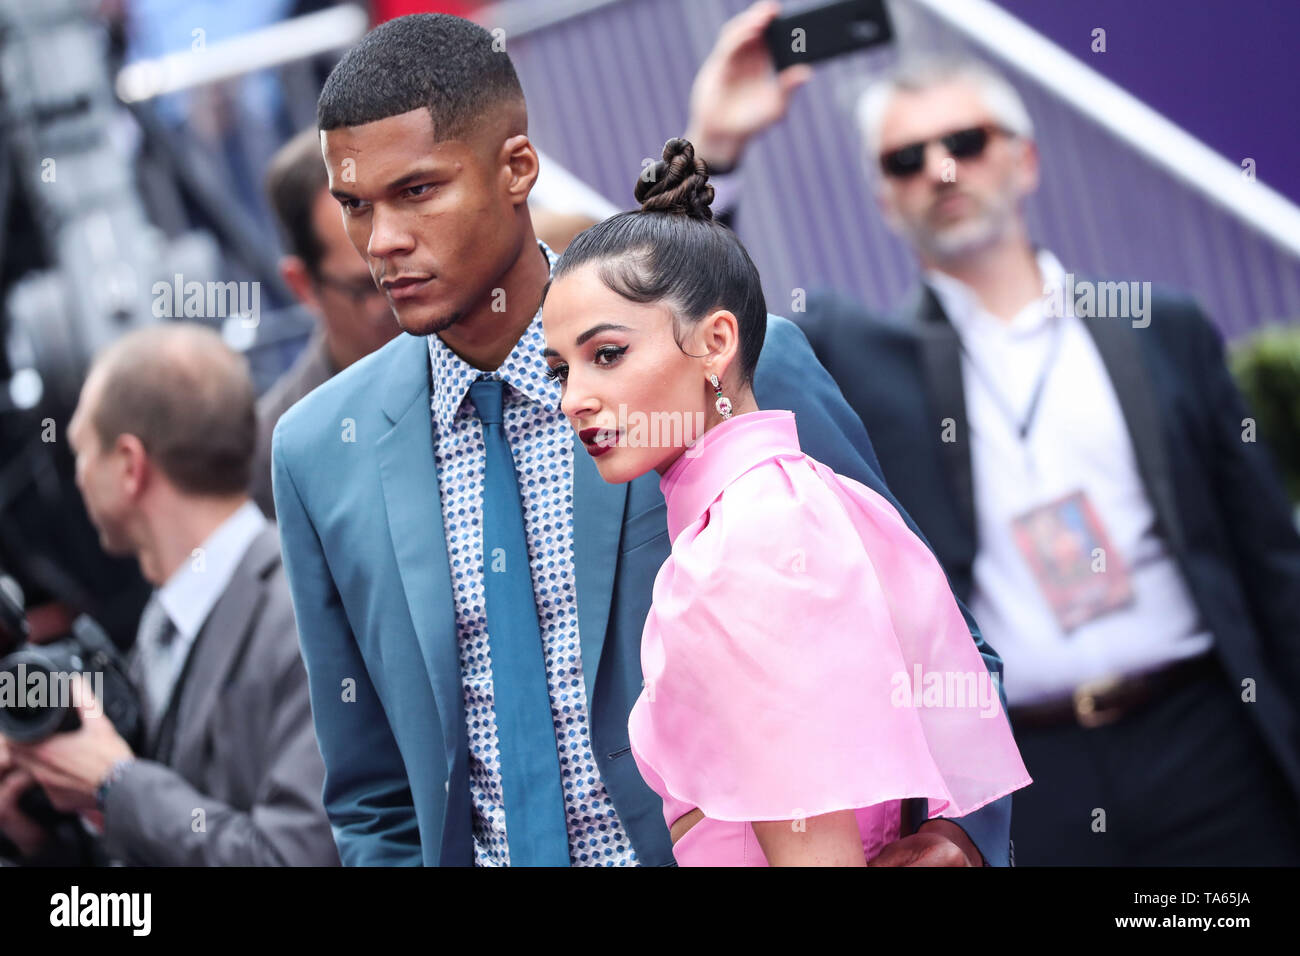 Hollywood, United States. 21st May, 2019. HOLLYWOOD, LOS ANGELES,  CALIFORNIA, USA - MAY 21: Jordan Spence and actress Naomi Scott arrive at  the World Premiere Of Disney's 'Aladdin' held at the El